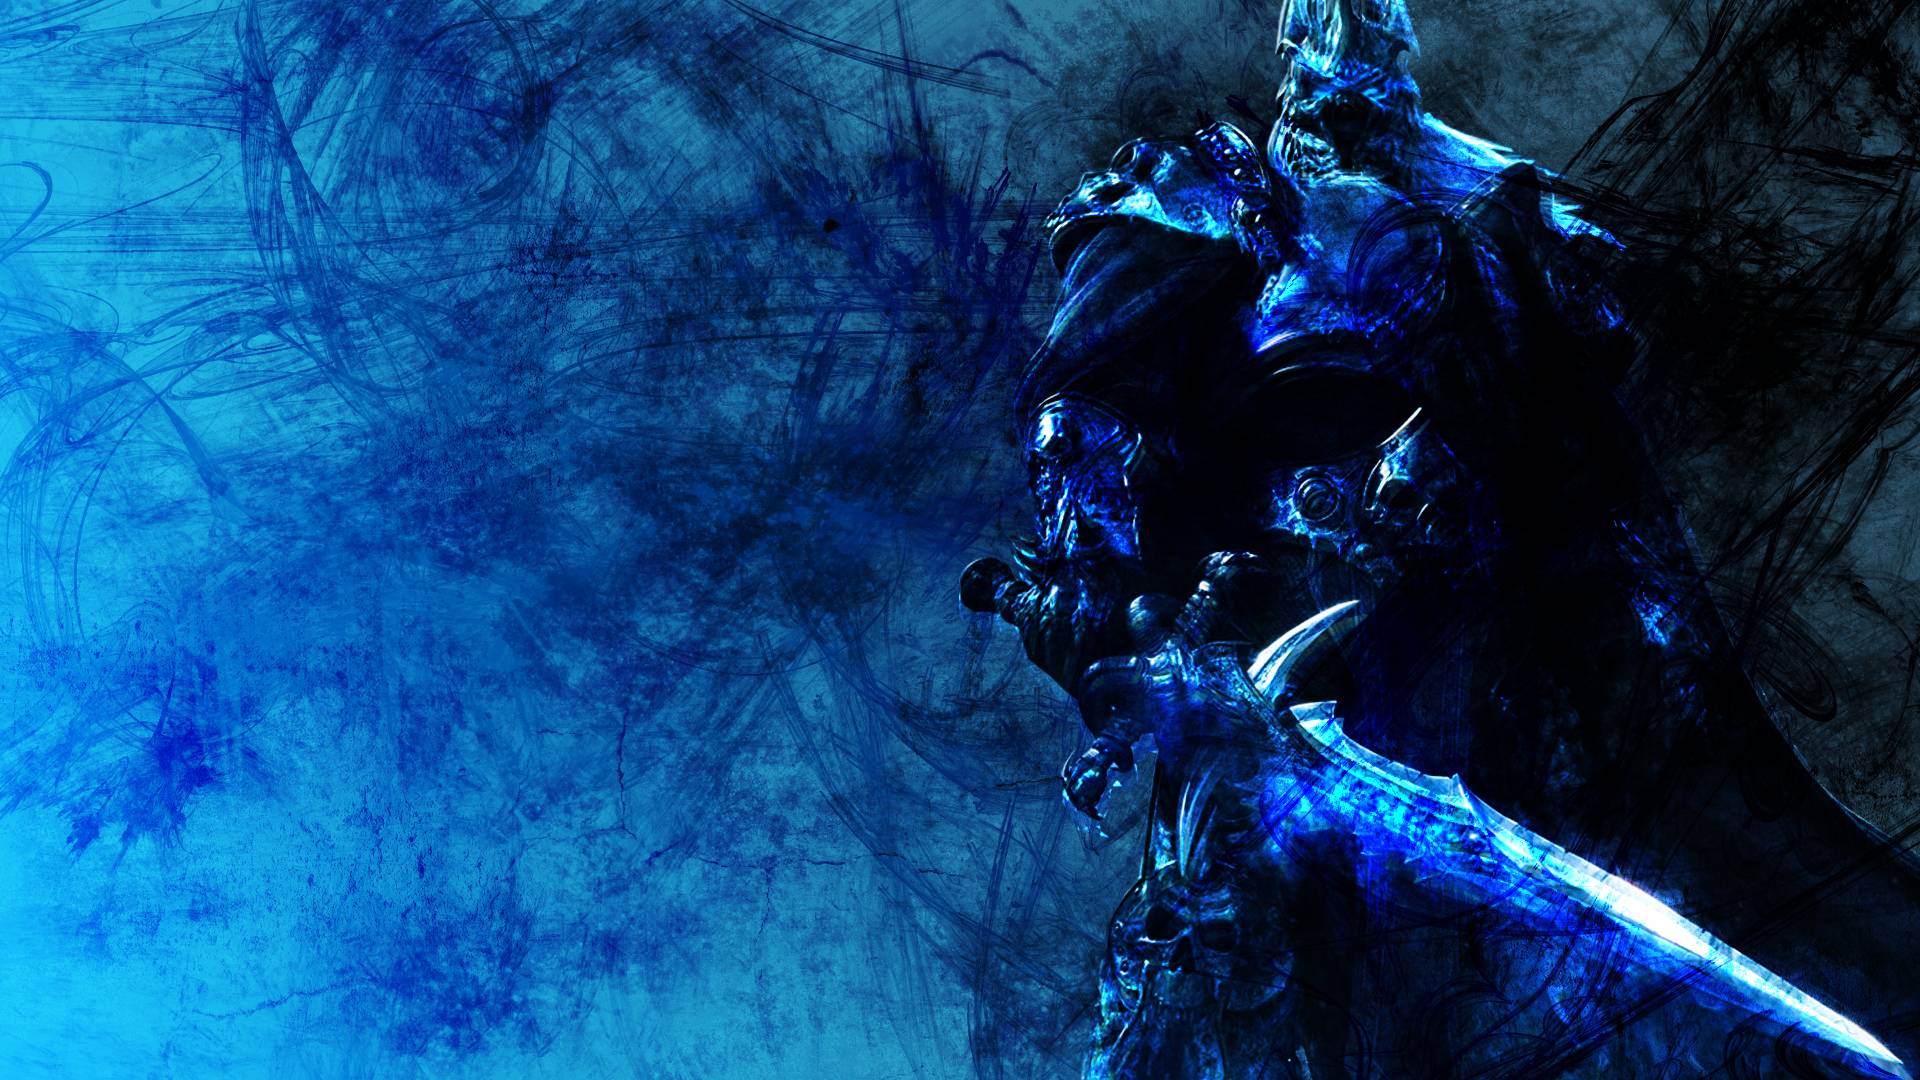 Wallpaper World of Warcraft, Lich King, archer, monster 5120x2880 UHD 5K  Picture, Image